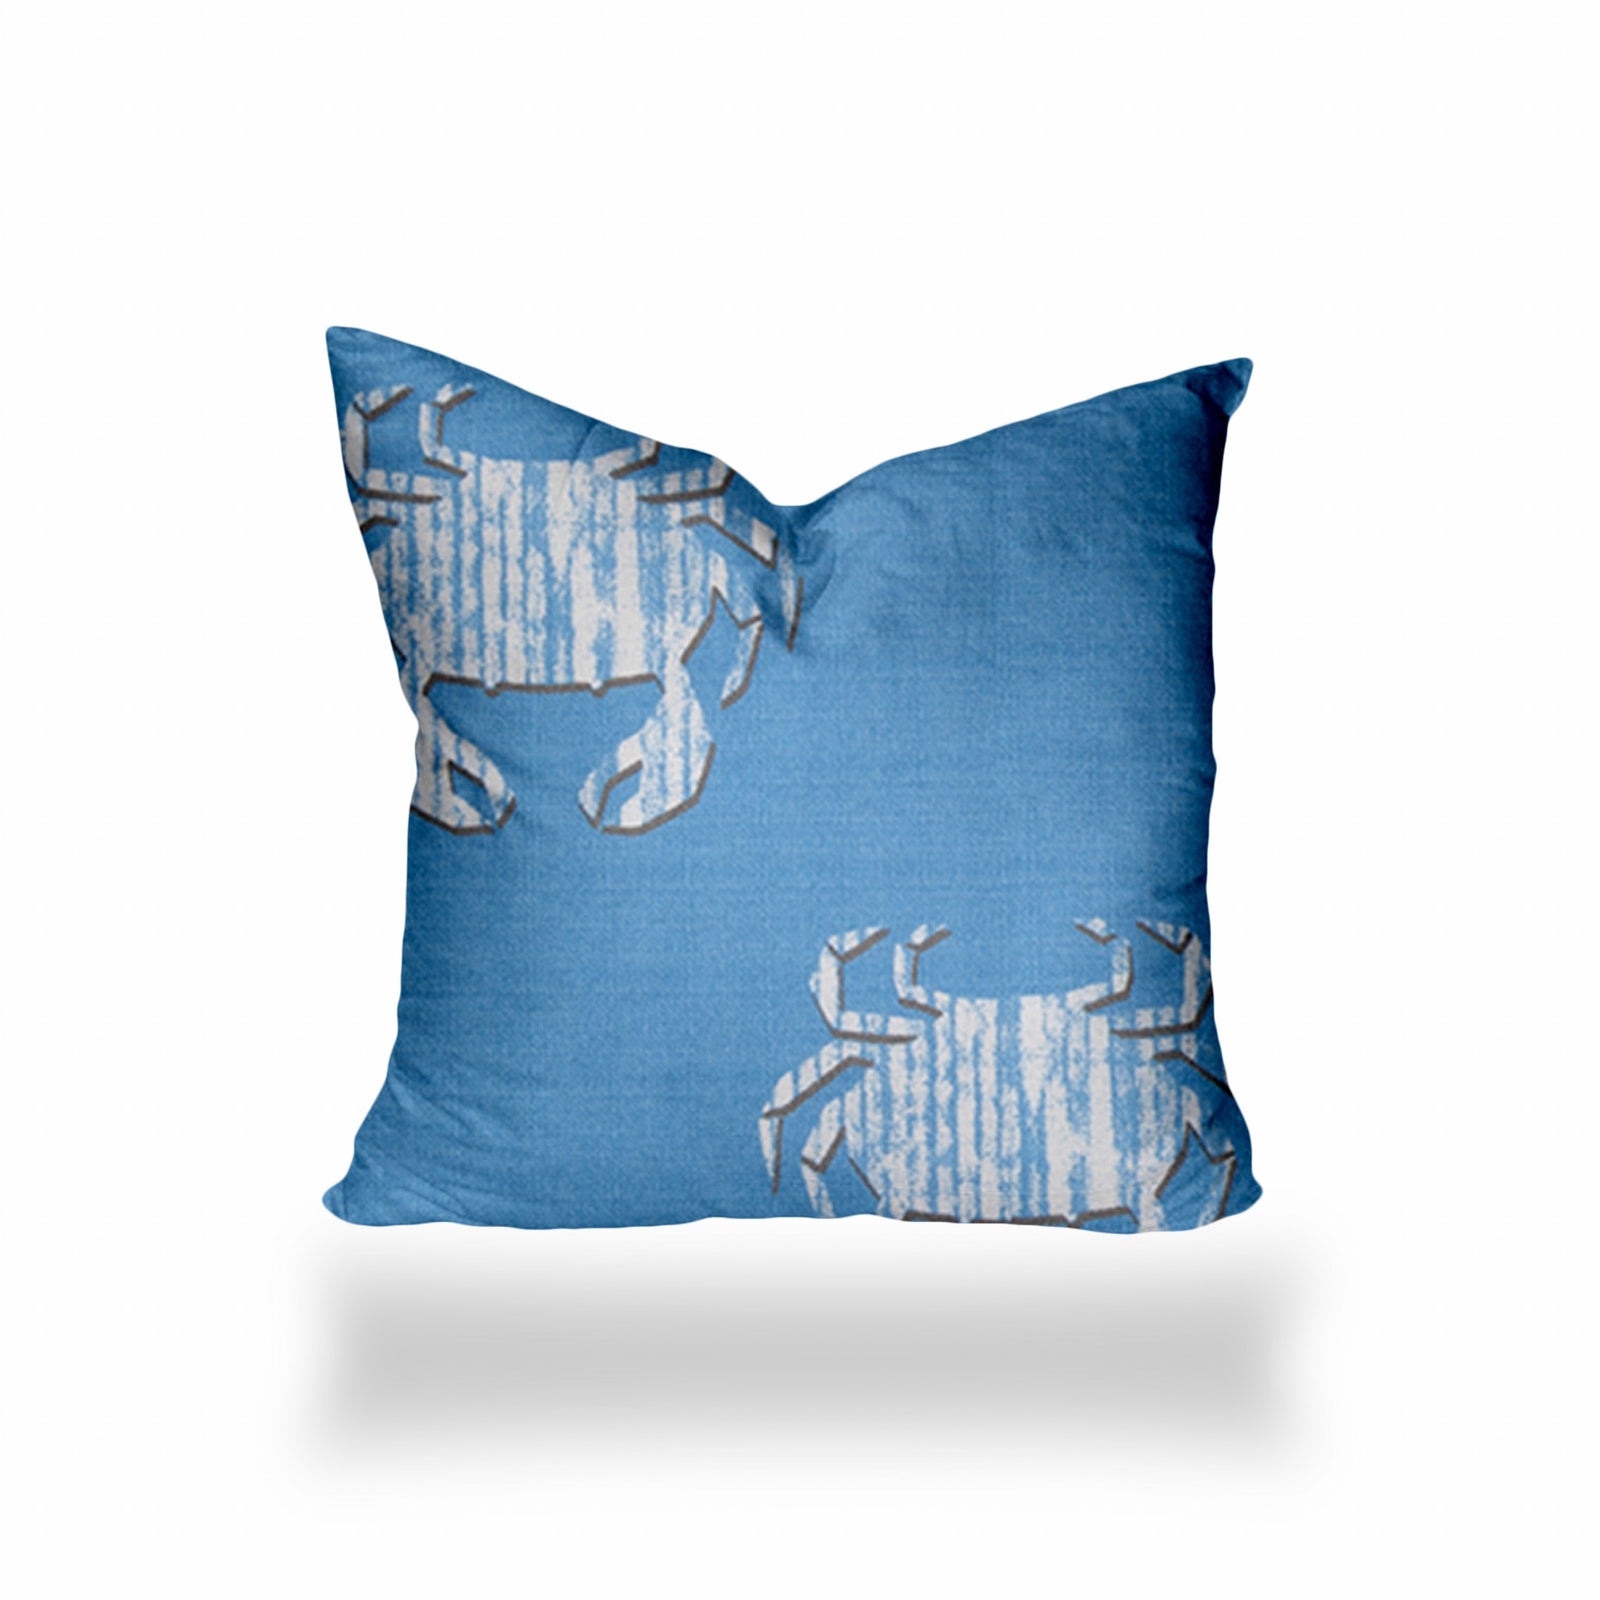 12" X 12" Blue And White Crab Zippered Coastal Throw Indoor Outdoor Pillow Cover